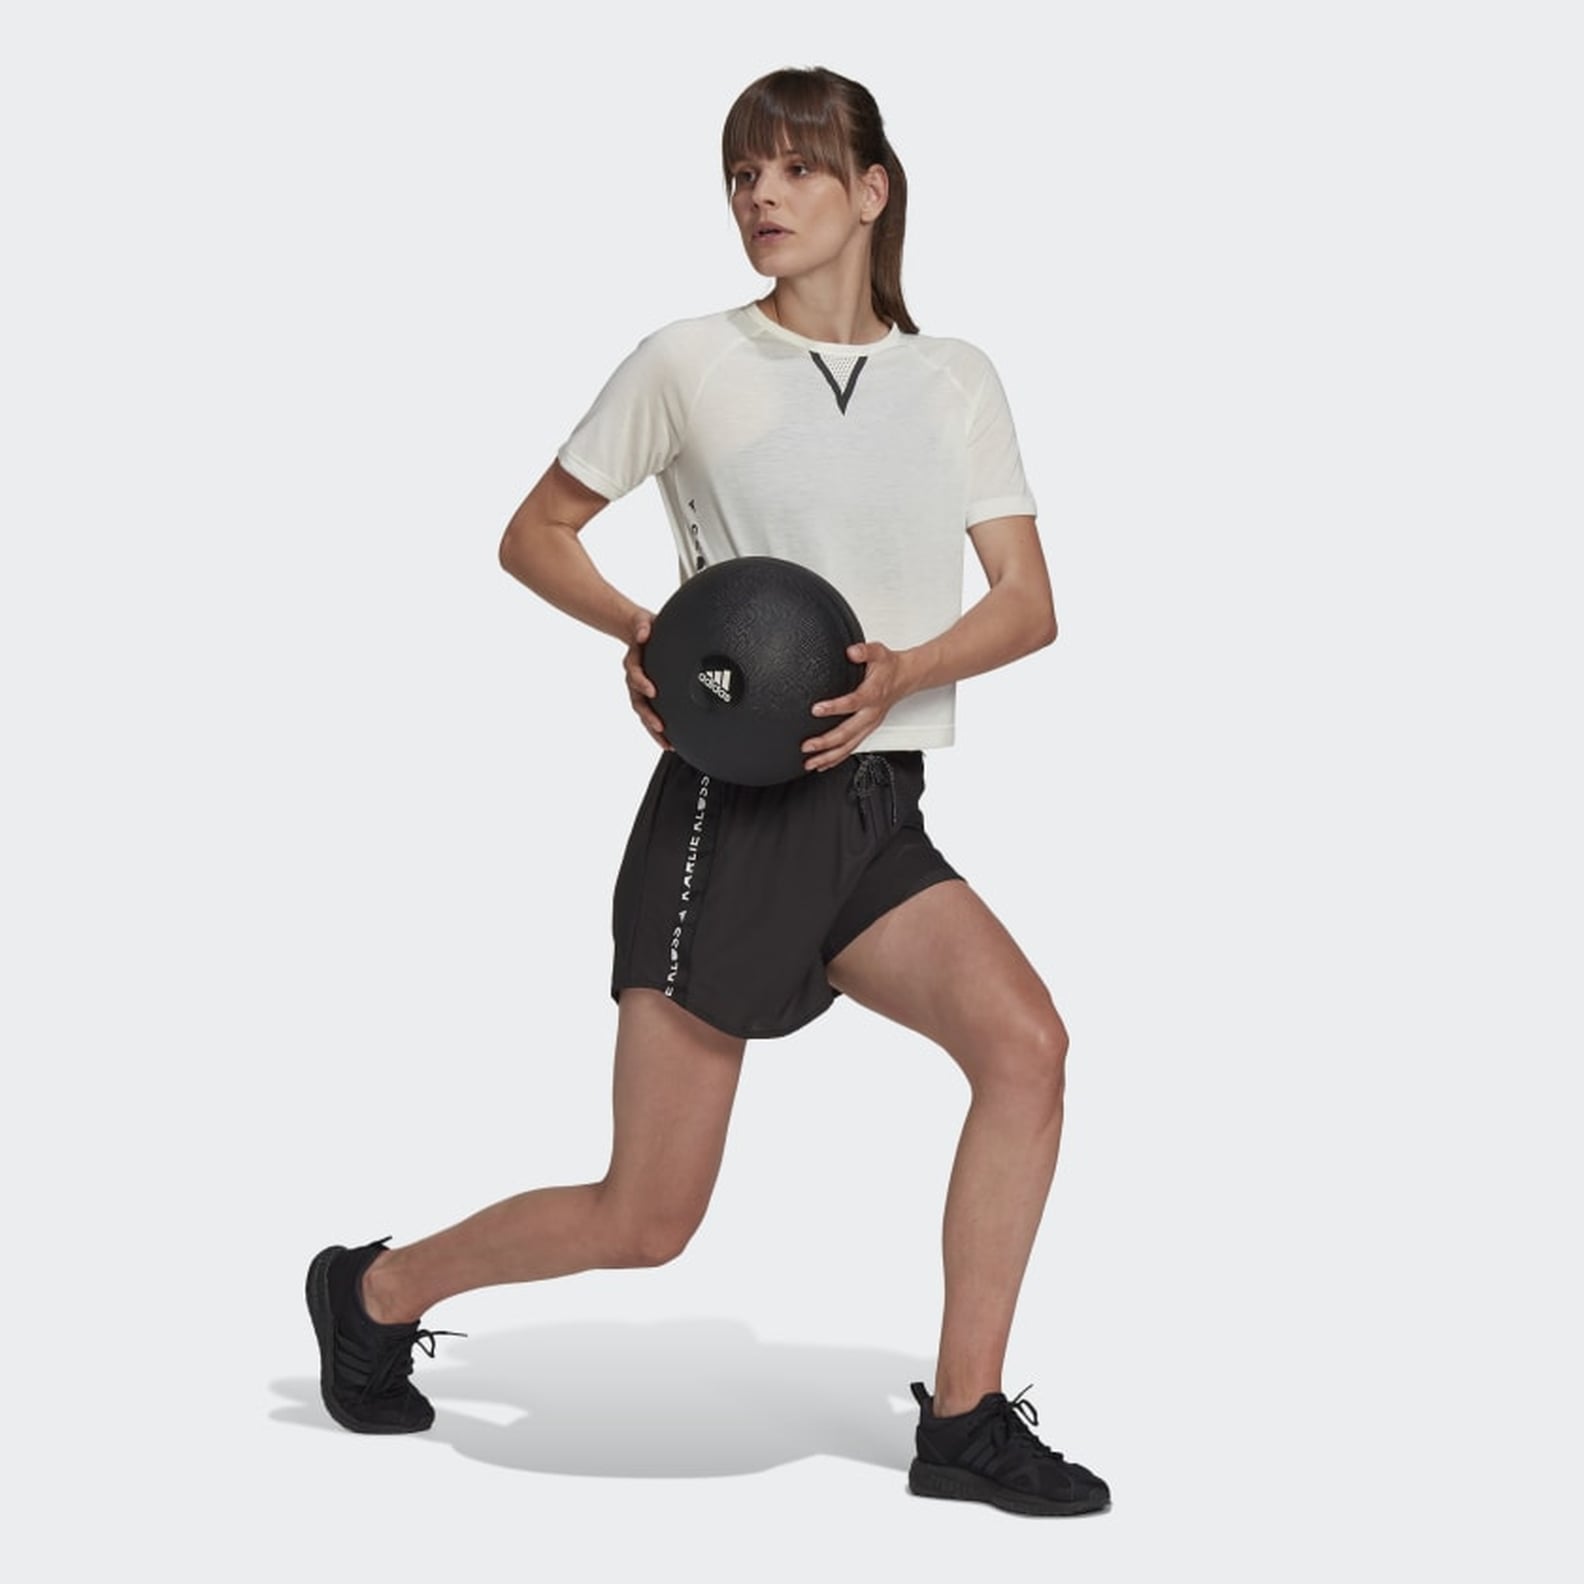 Karlie Kloss Teams Up With Adidas For Her First Collection | POPSUGAR ...